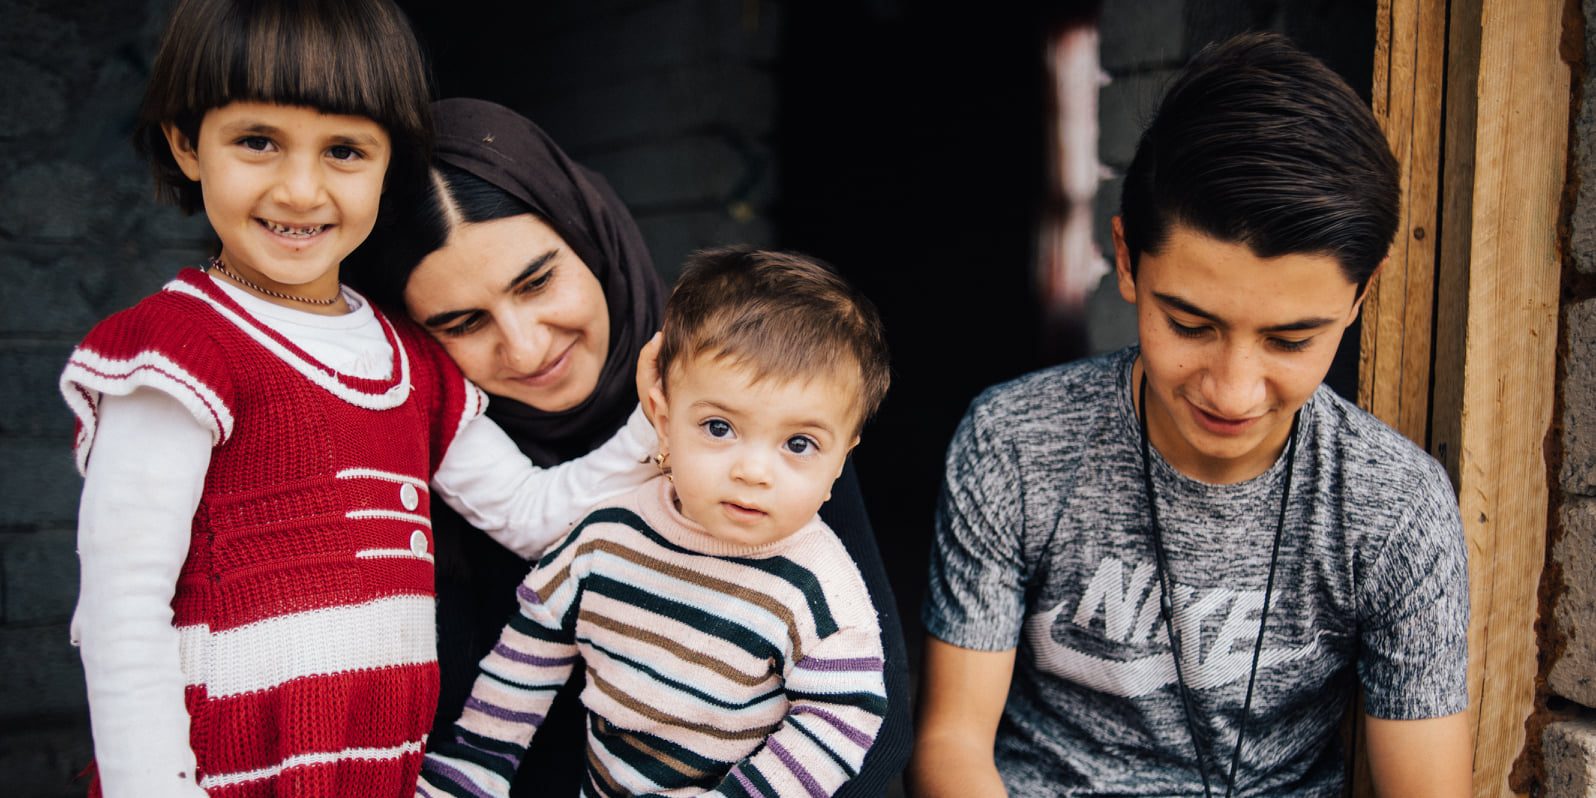 Covid-19 has impacted refugees and displaced persons more acutely than others, with many of them left without work and living in overcrowded tents and apartments. Photo from Habibi International.